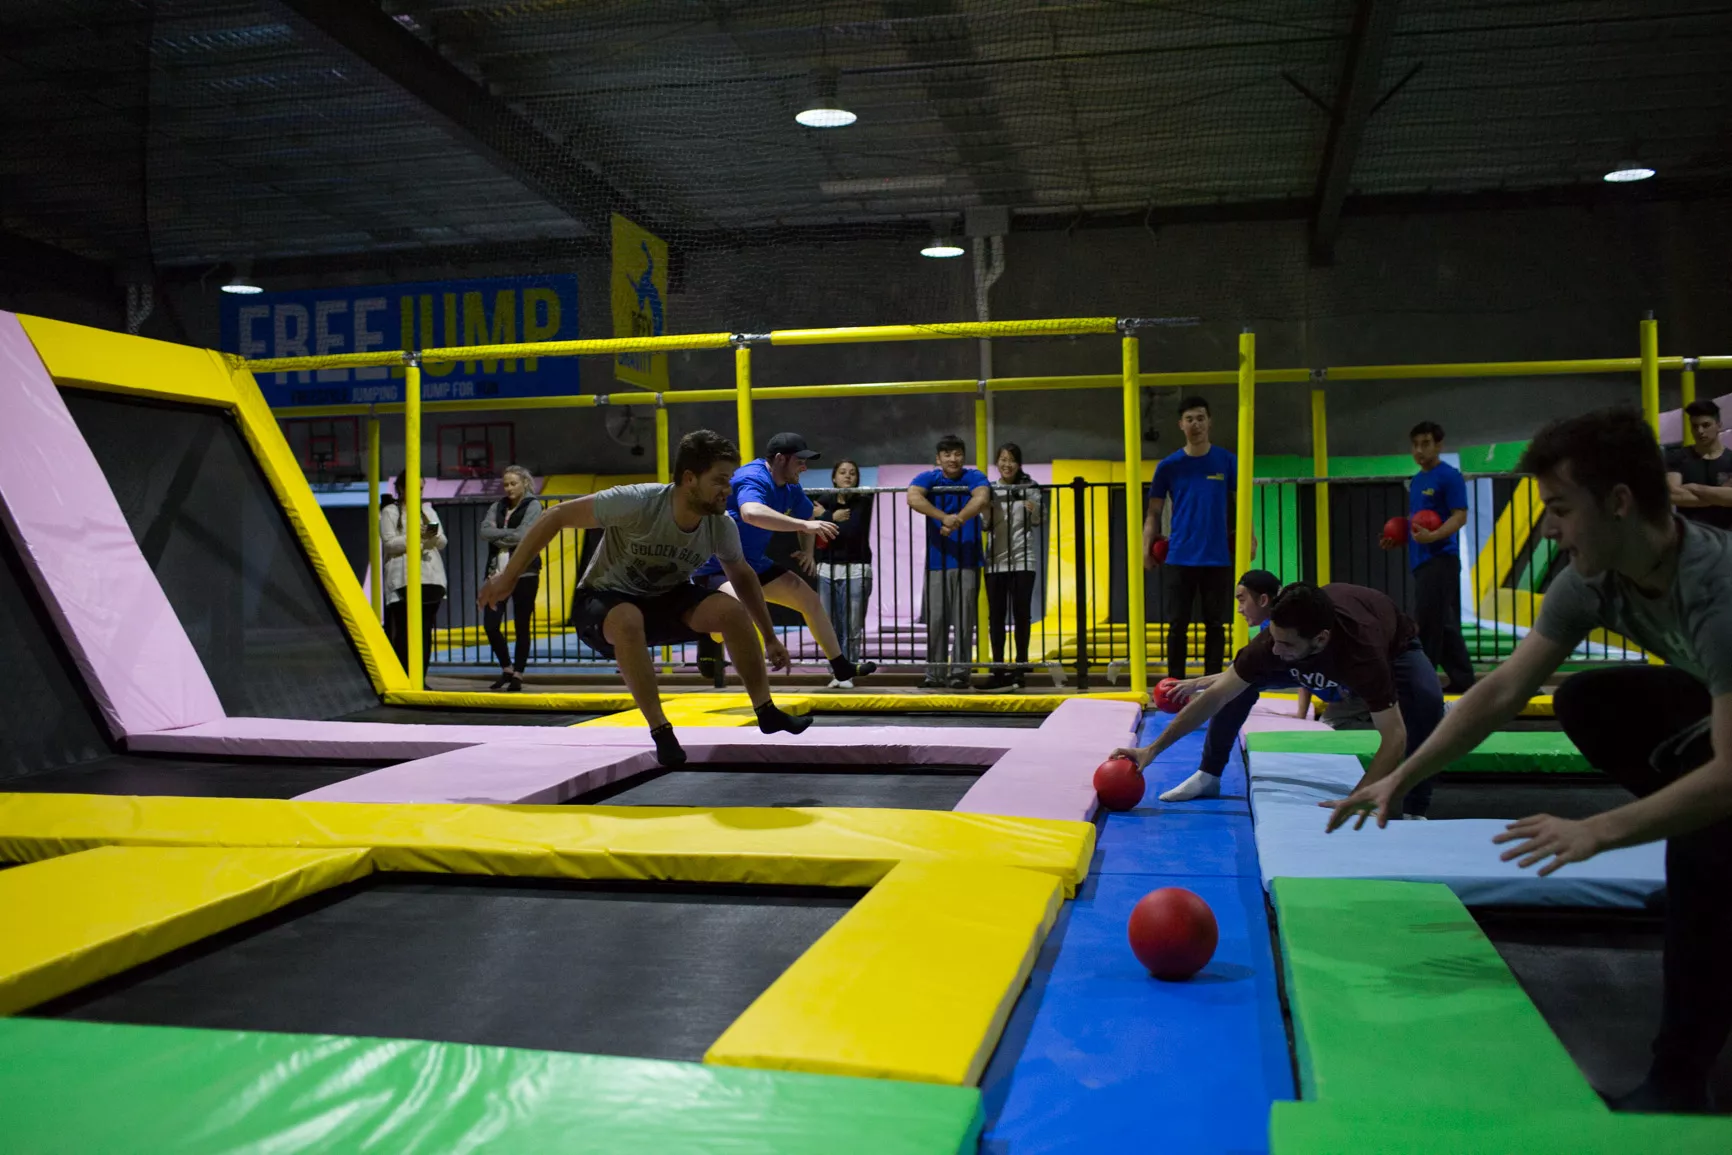 ThreeSixty Trampoline Park in Australia, Australia and Oceania | Trampolining - Rated 3.4